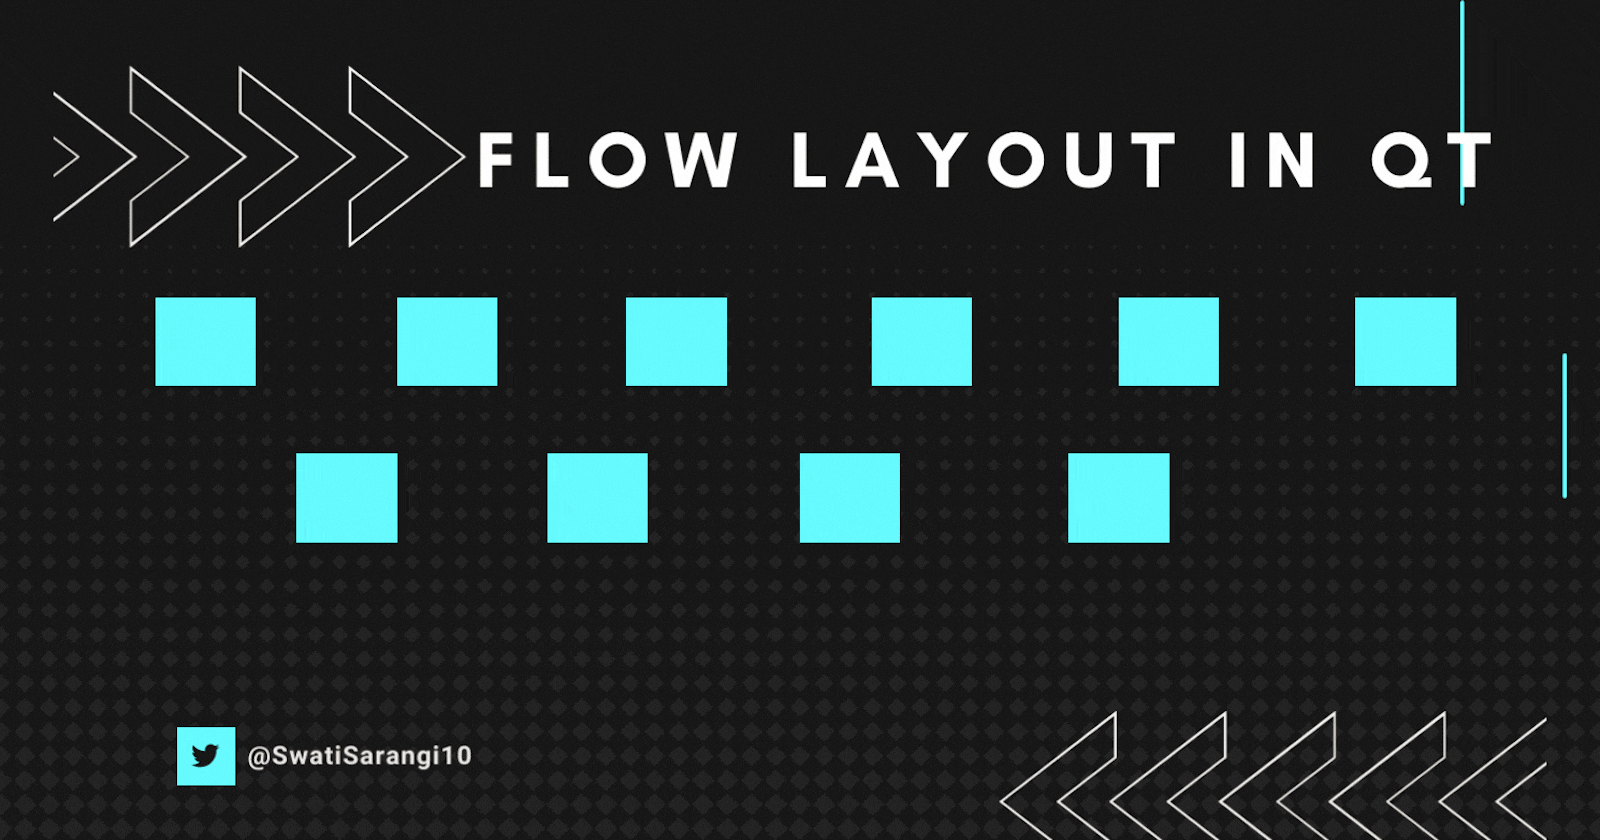 What is a Flow Layout in Qt and how is it used?